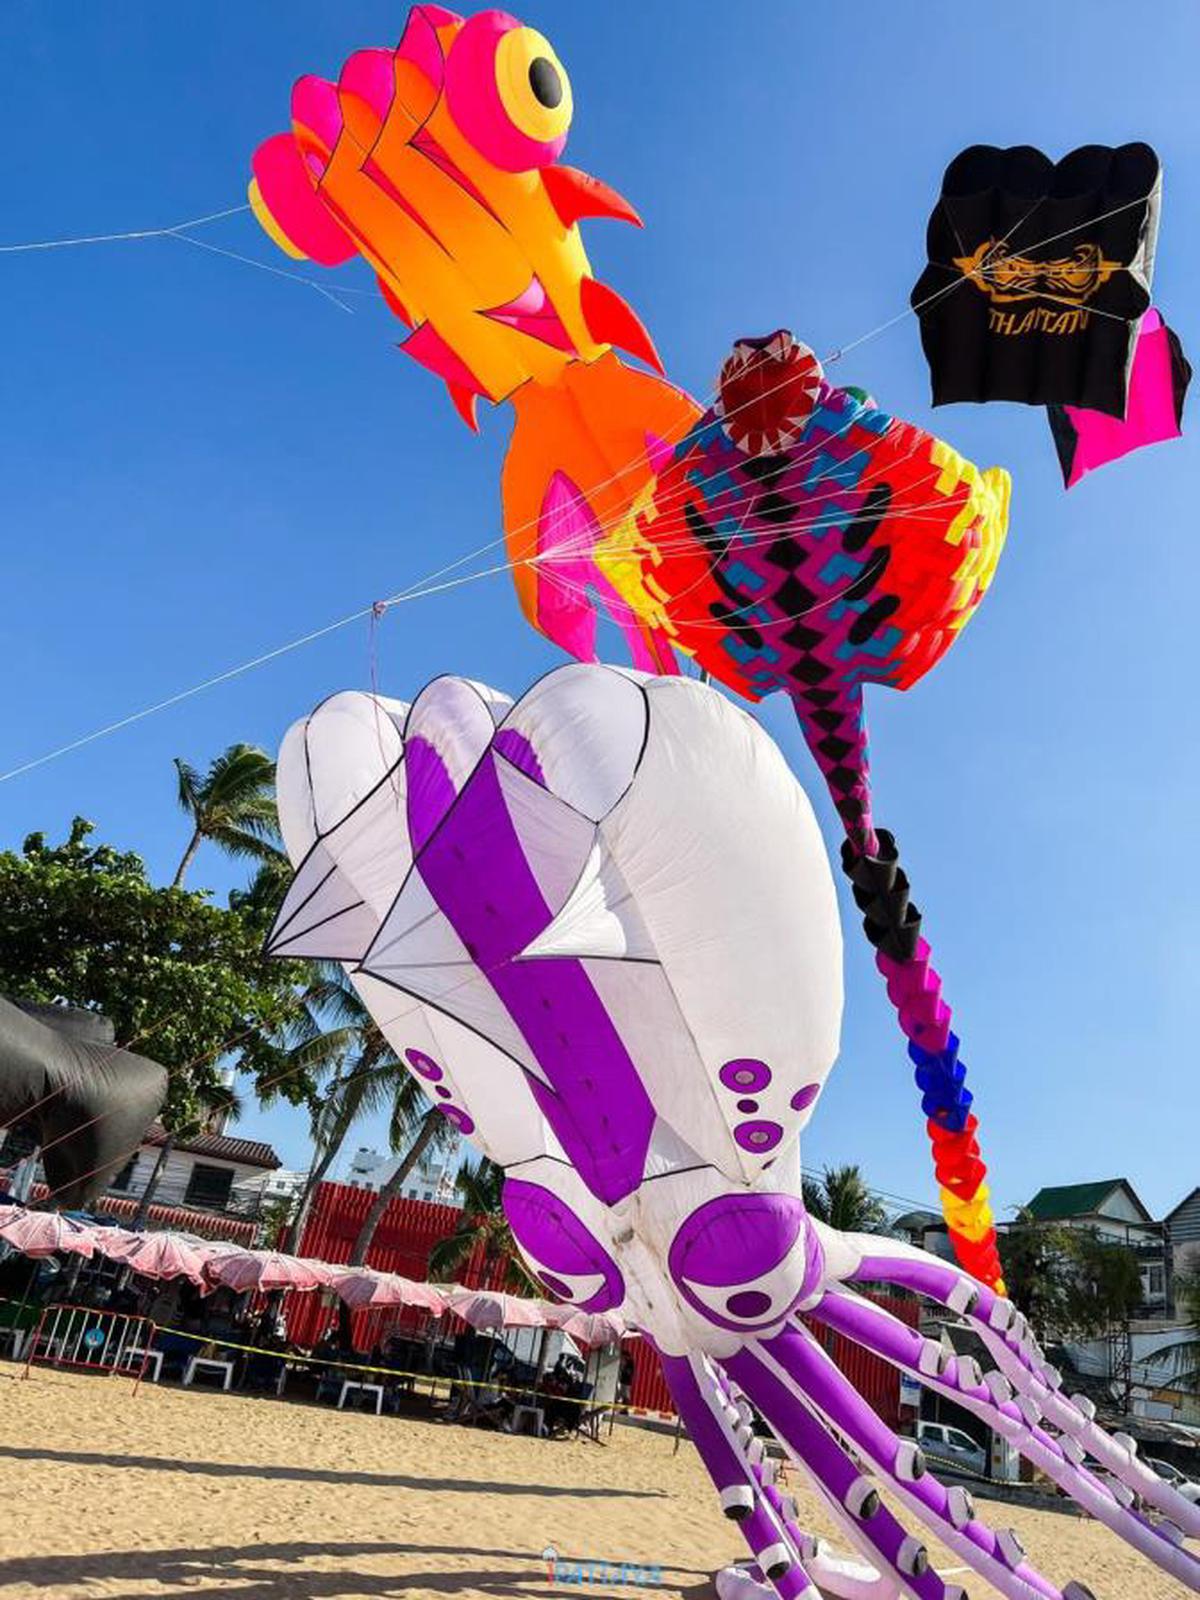 Kites from across countries will arrive for the festival